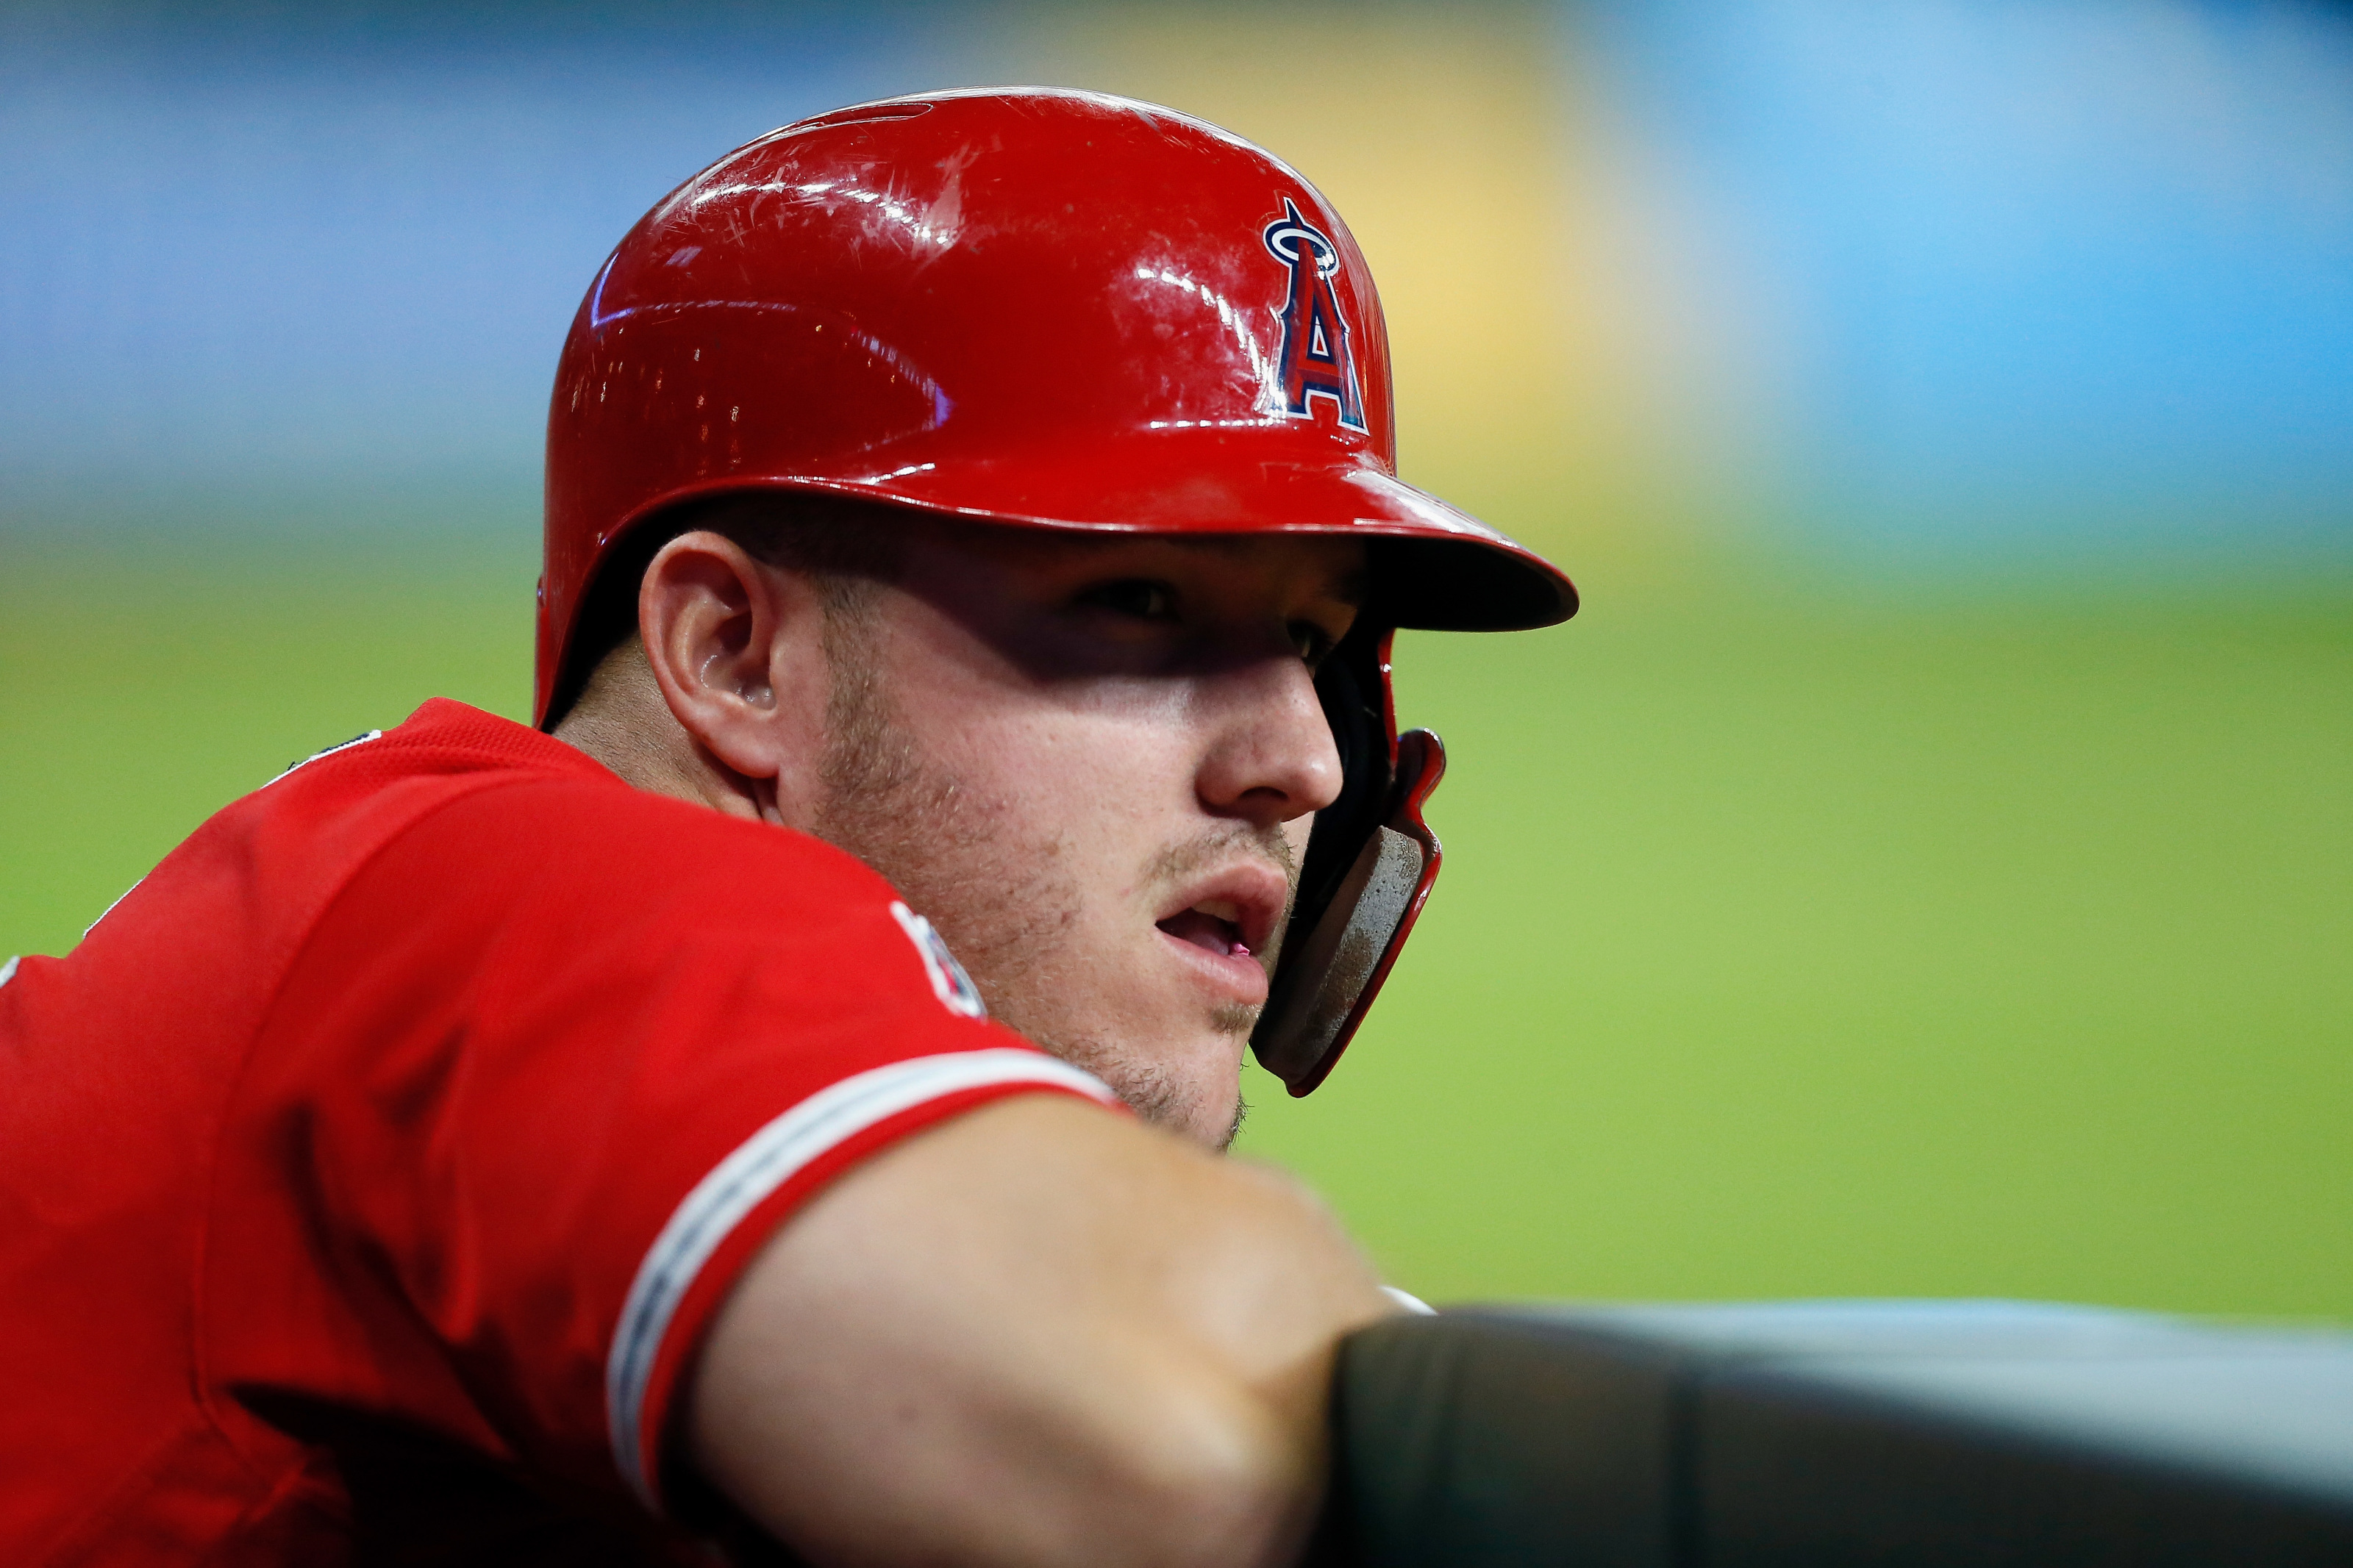 A Blueprint for Mike Trout to the Phillies